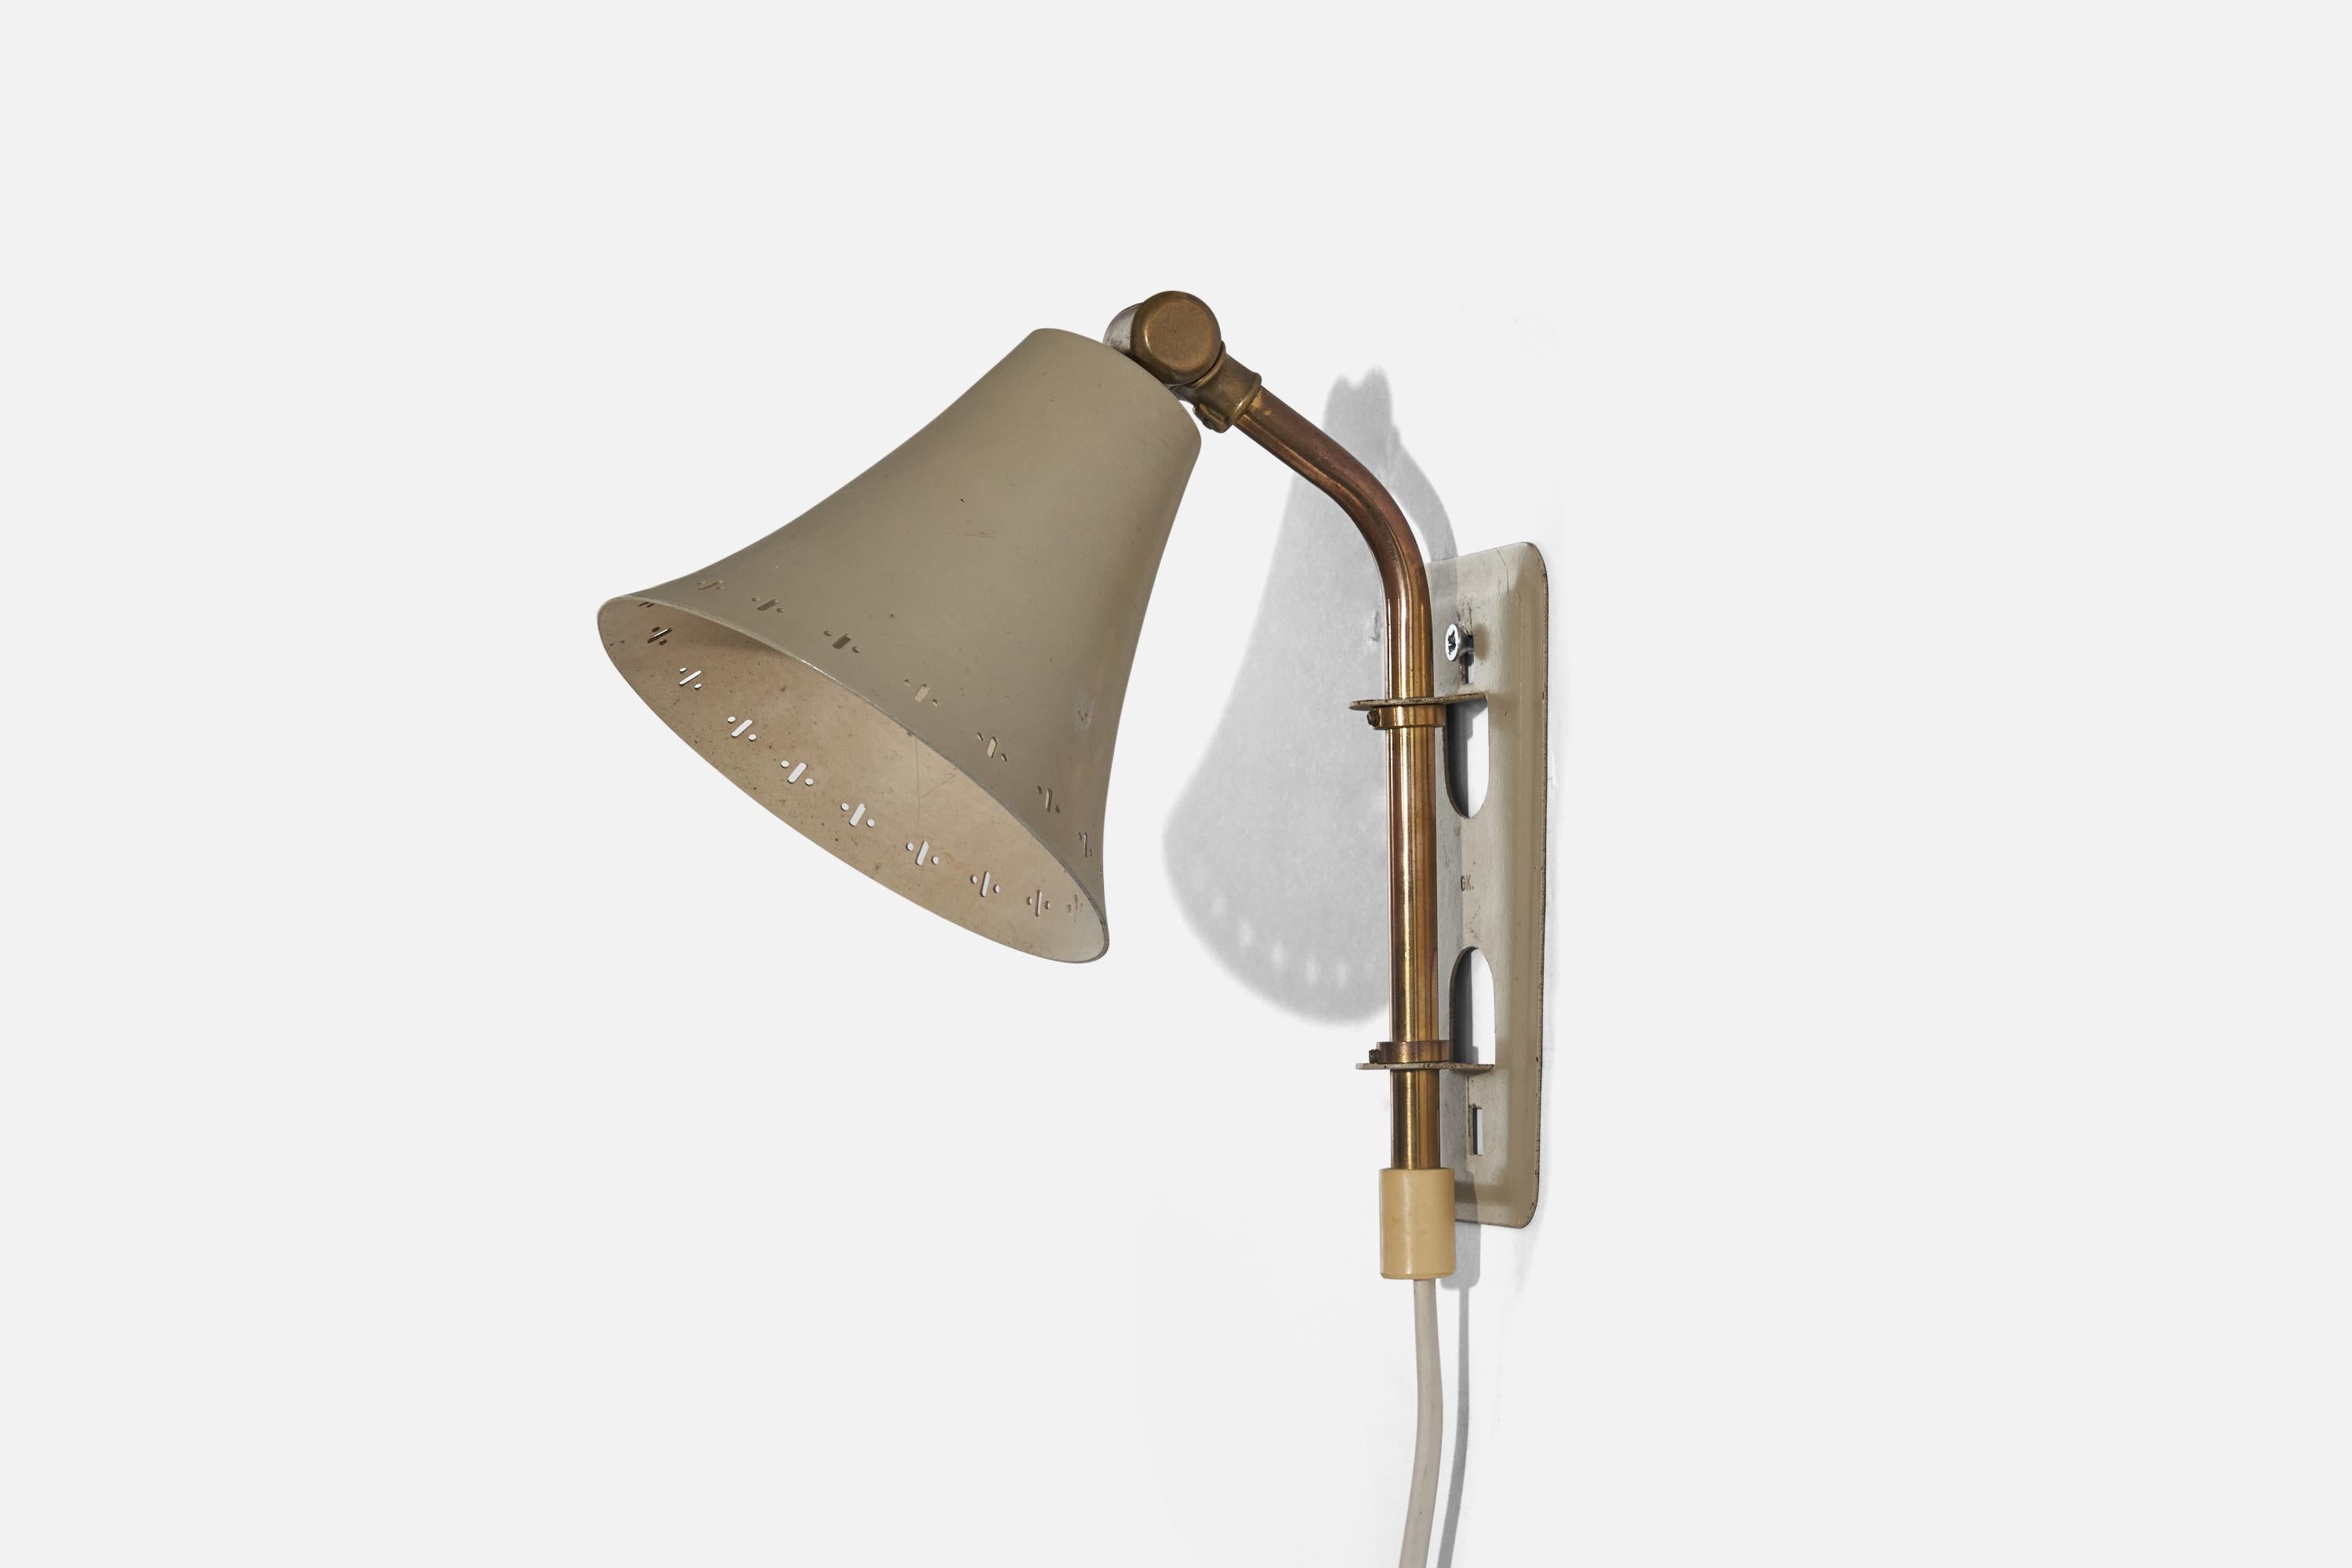 Mid-20th Century Swedish Designer, Wall Light, Brass, Lacquered Metal, Sweden, c. 1950s For Sale